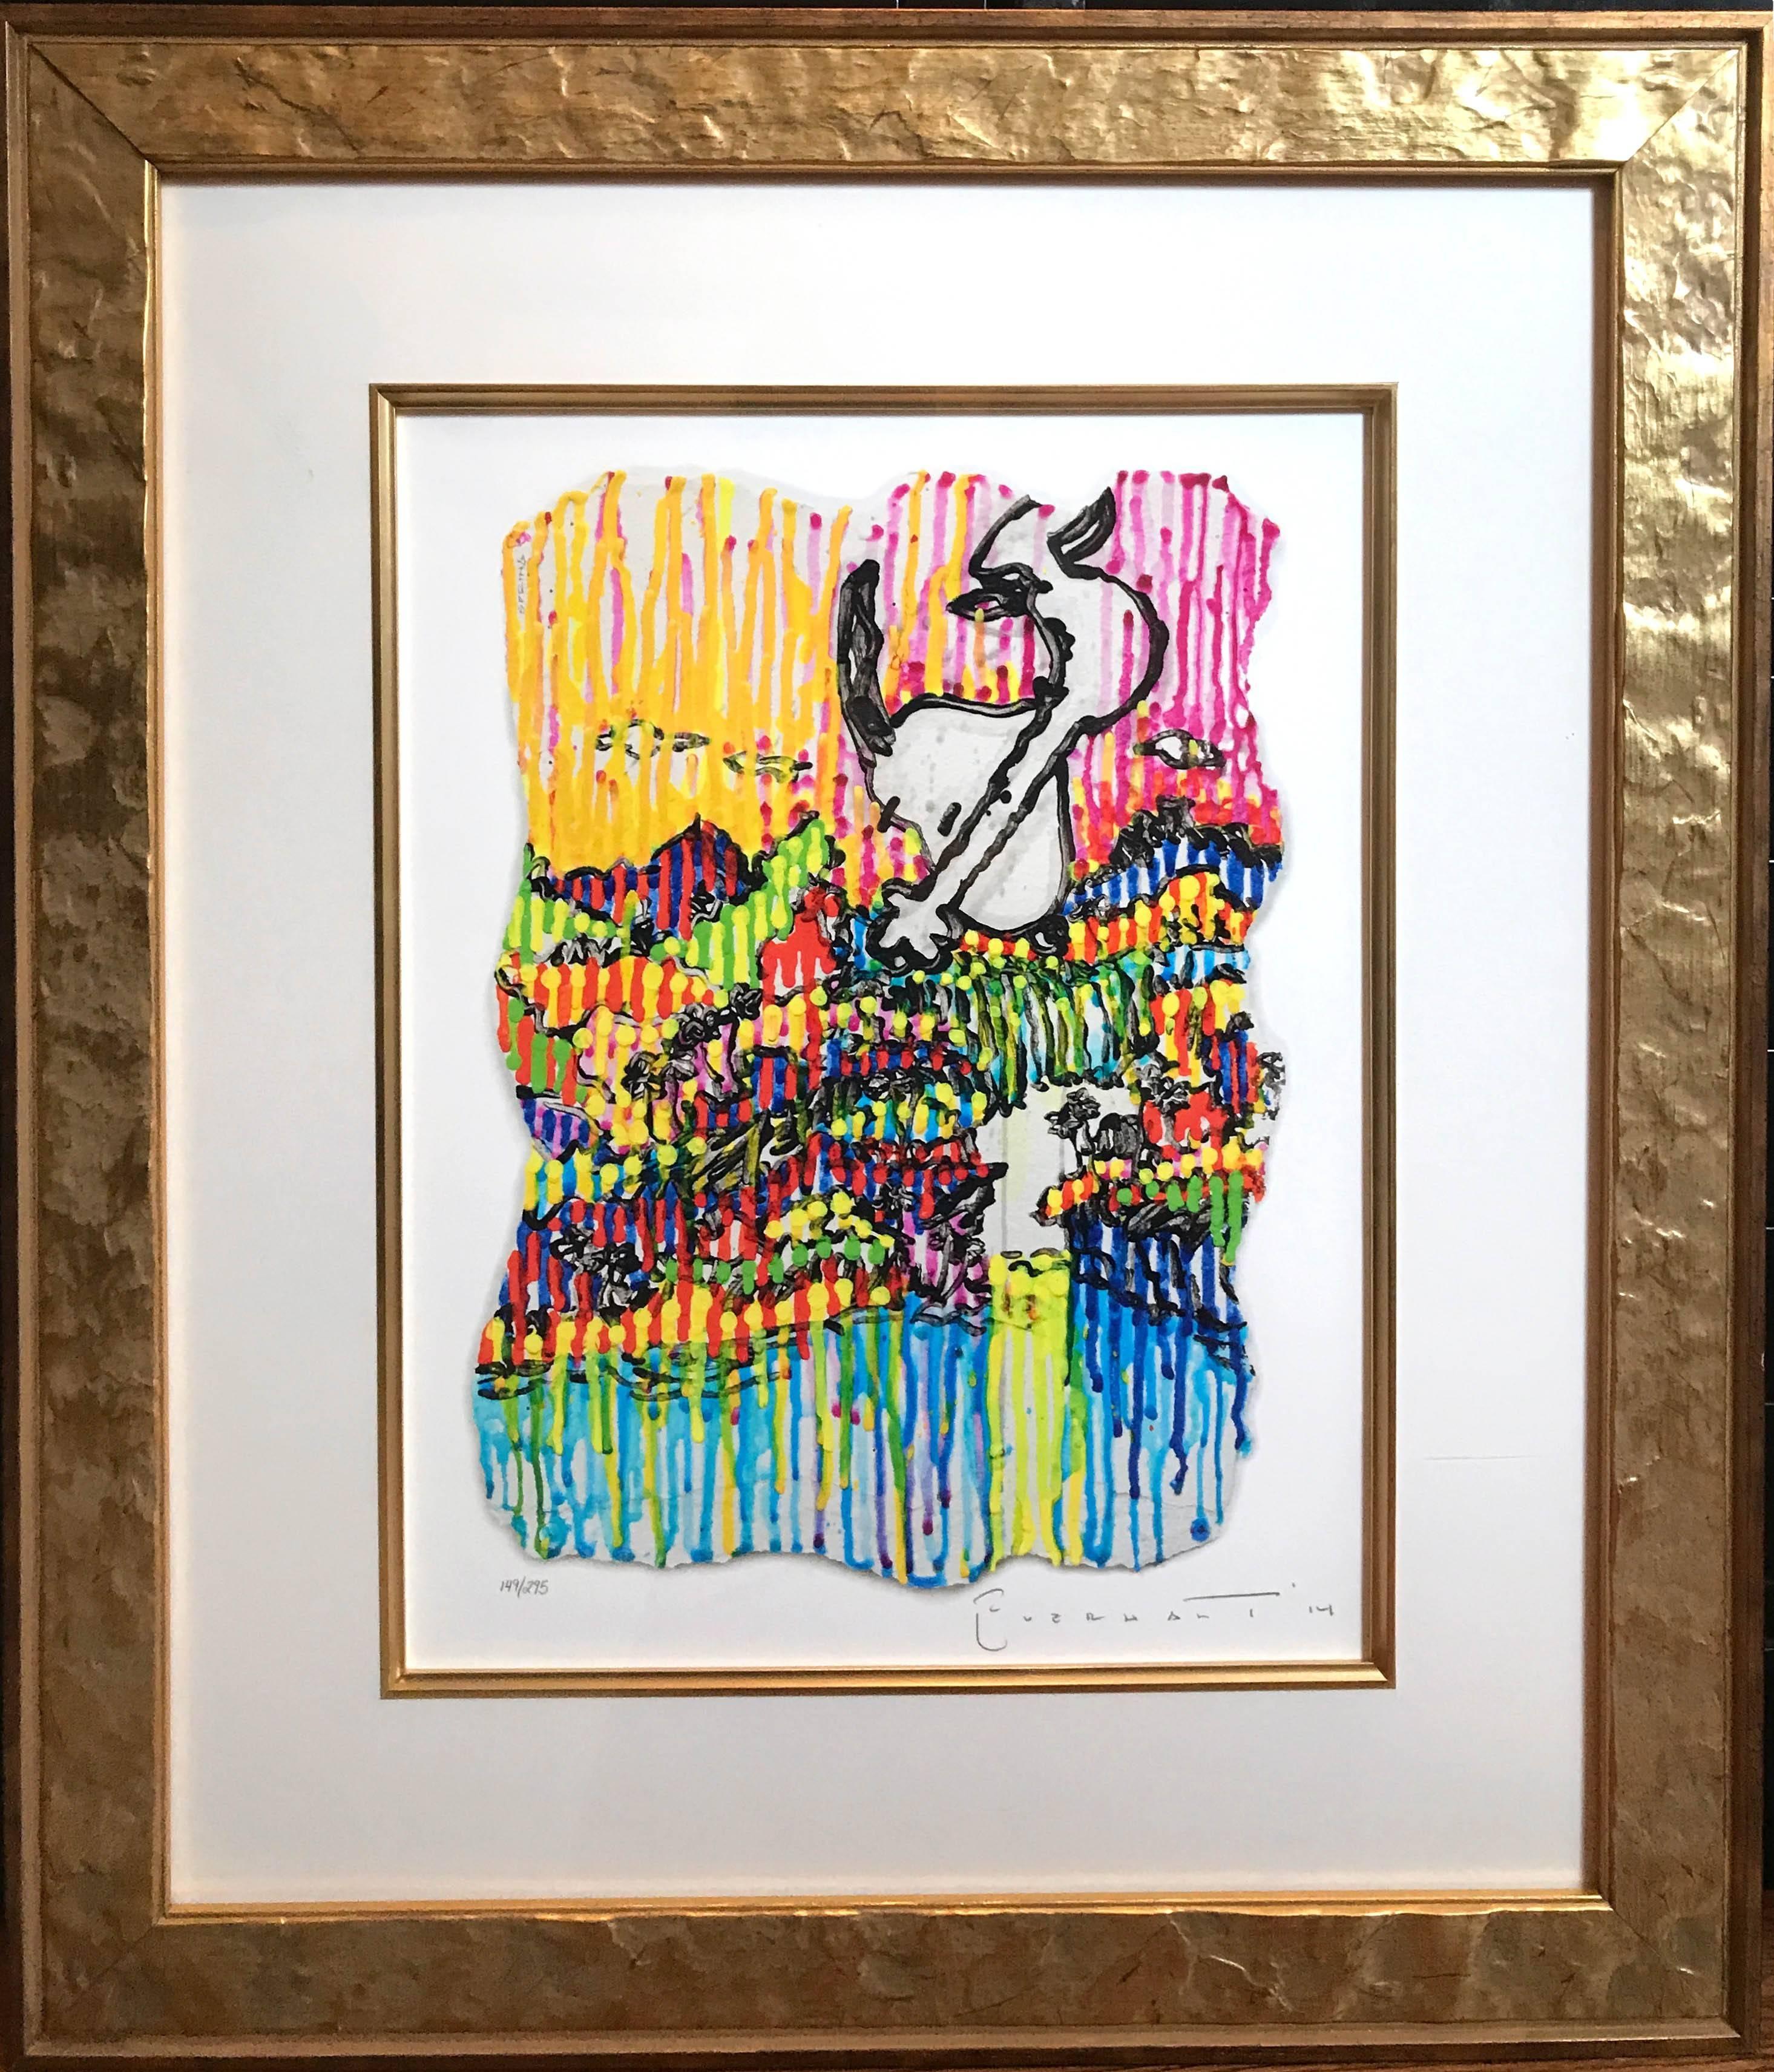 Super Fly - Spring - Print by Tom Everhart